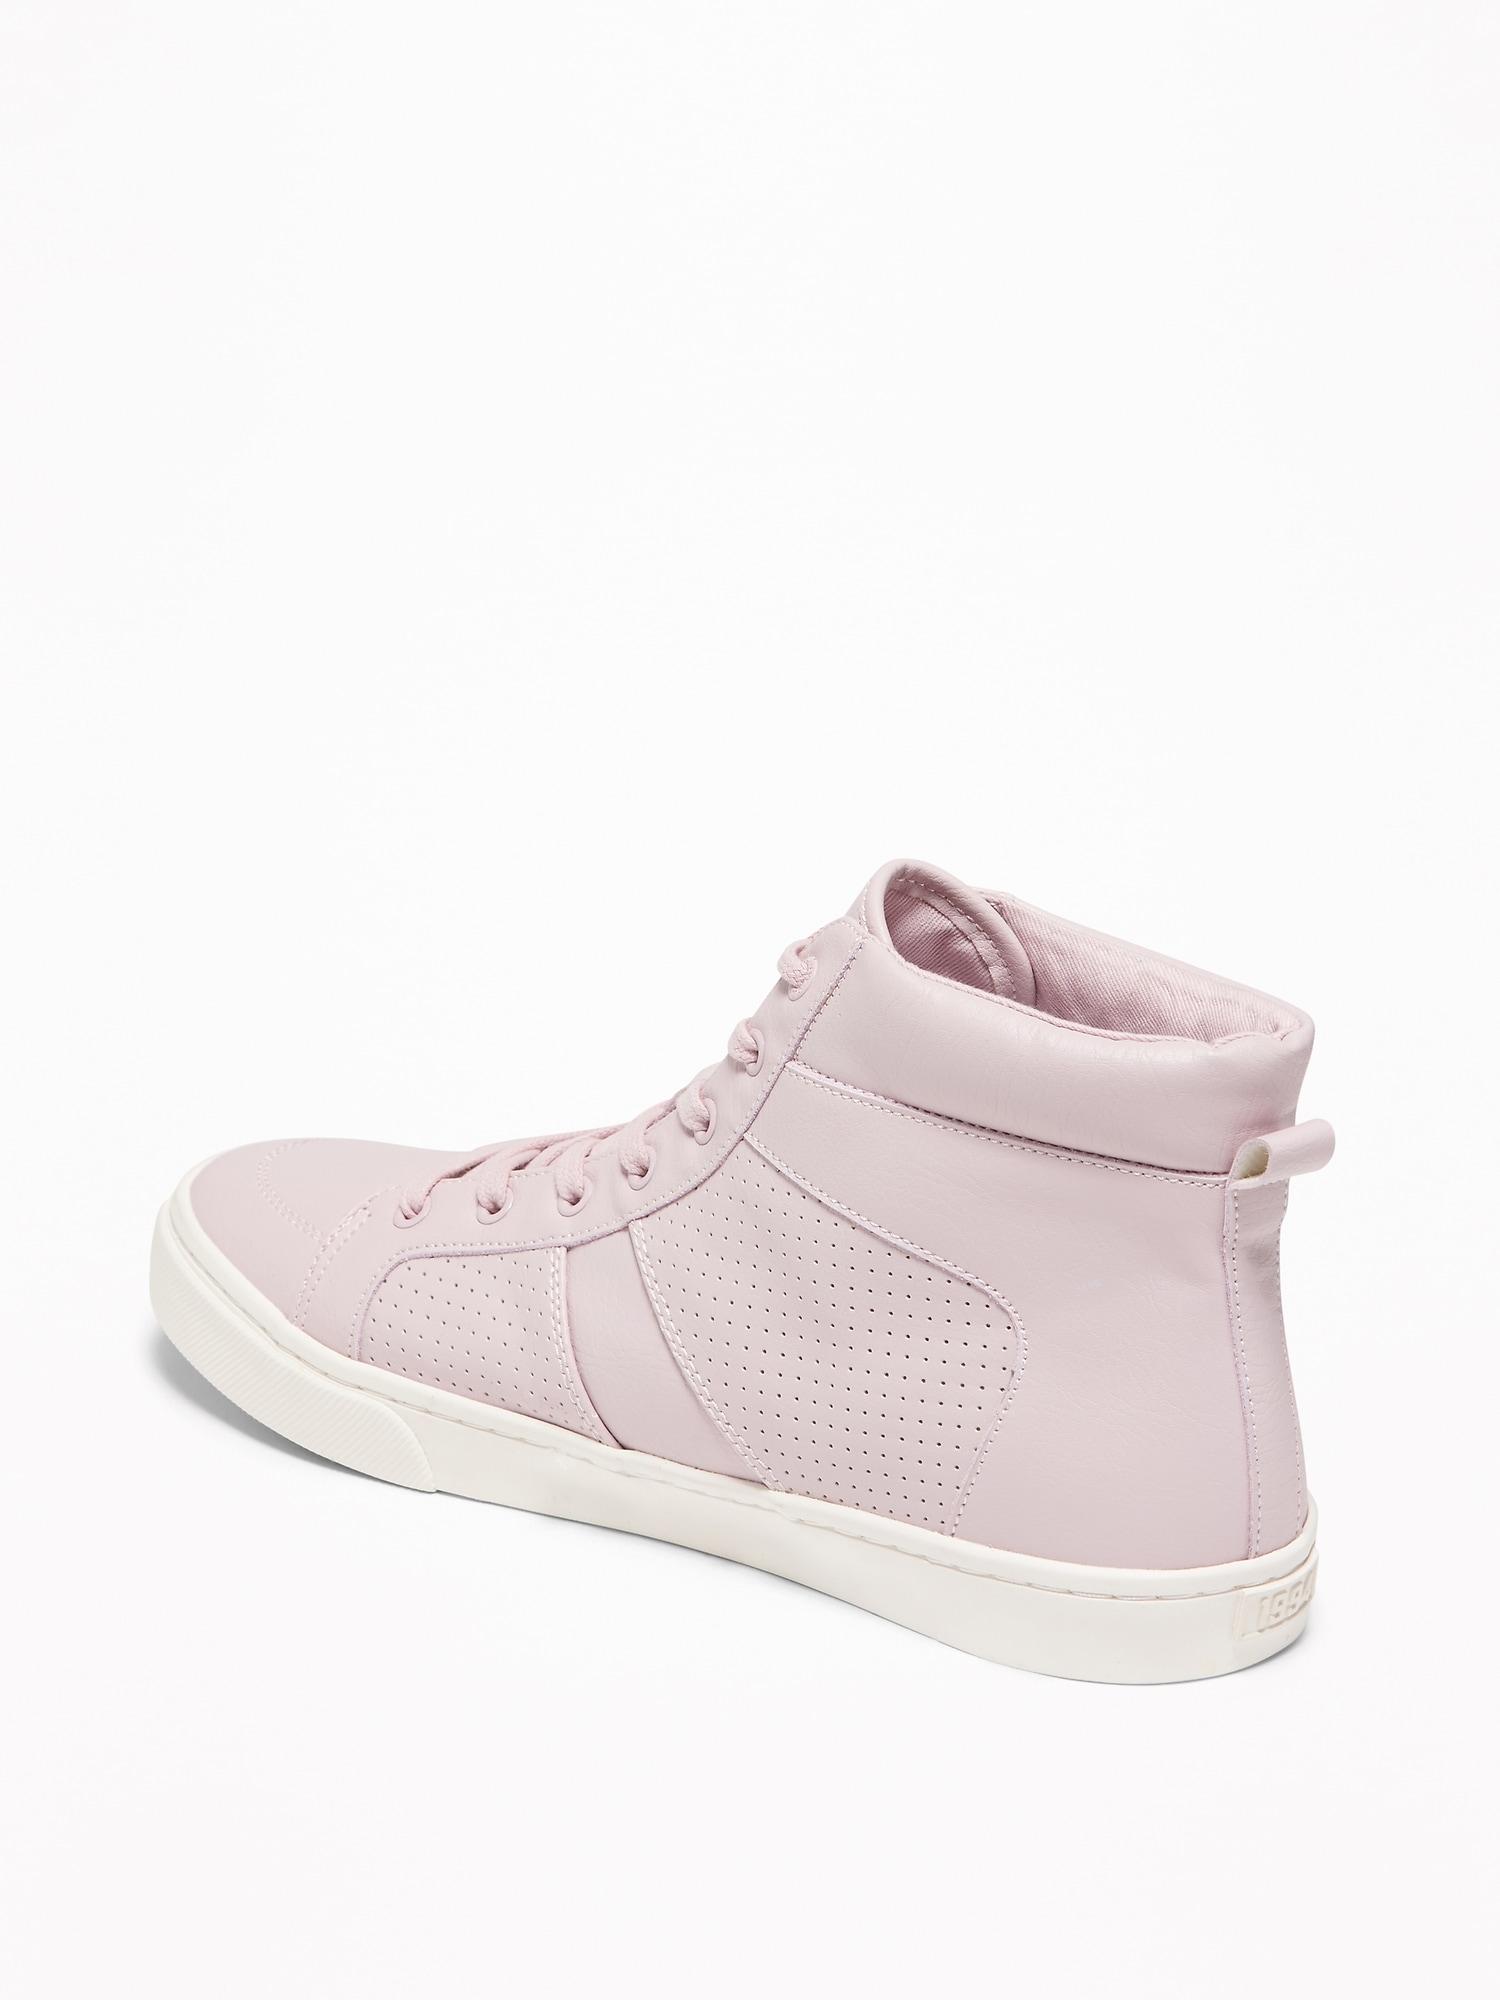 old navy pink shoes